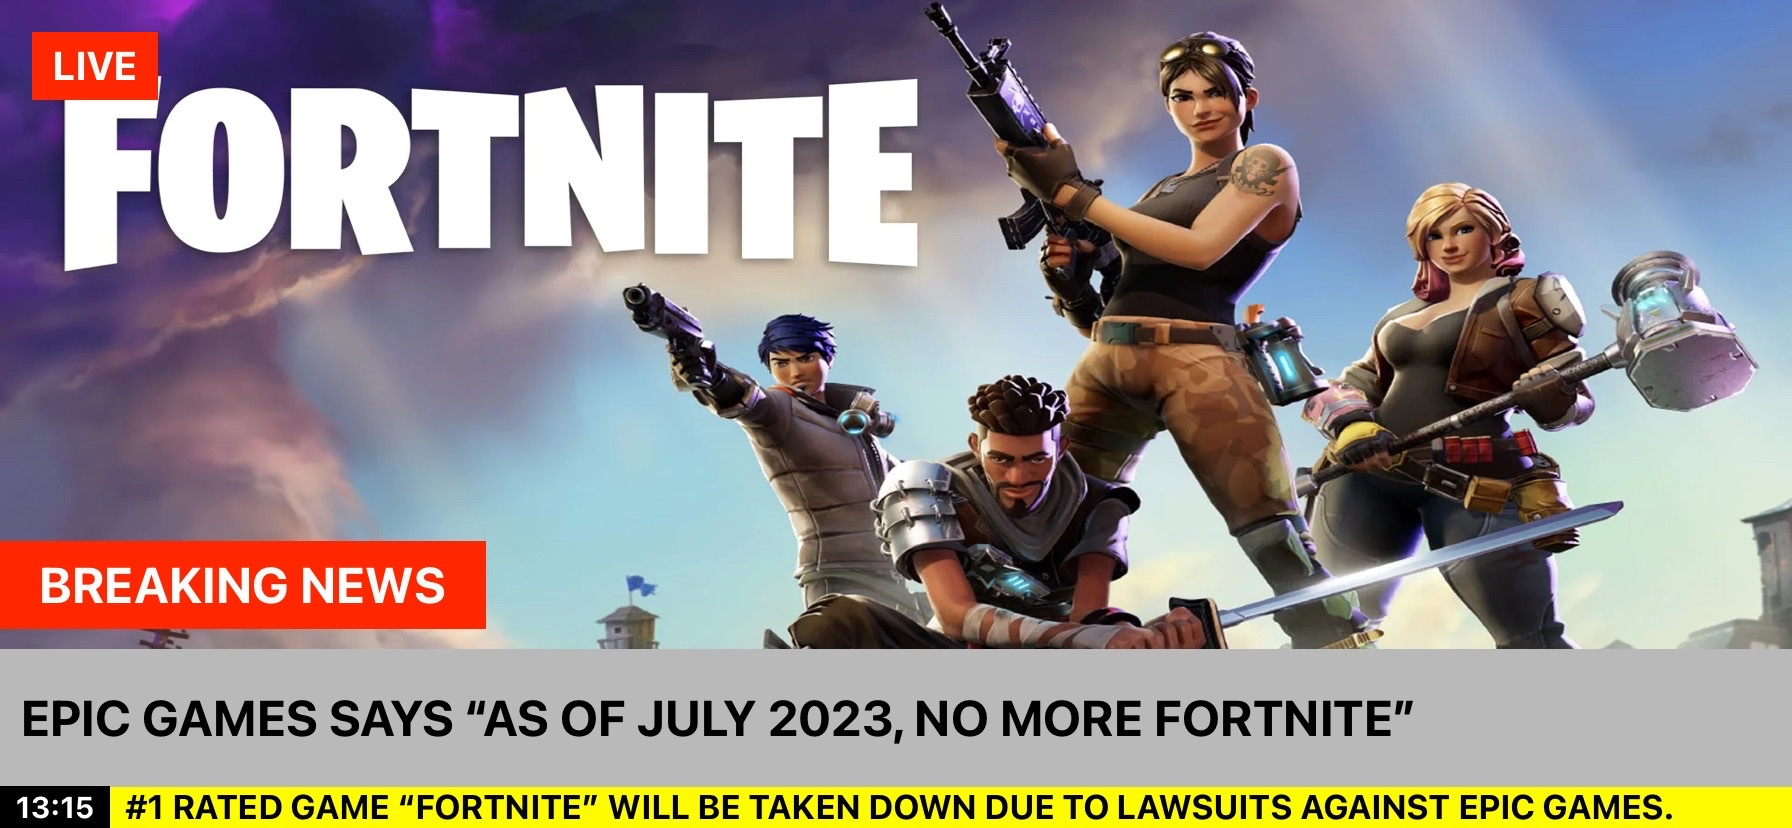 As Some May Have Already Heard The Gaming Company Has A Lawsuit Being Filed Against Them Over The Famous Shooter Game “Fortnite.”